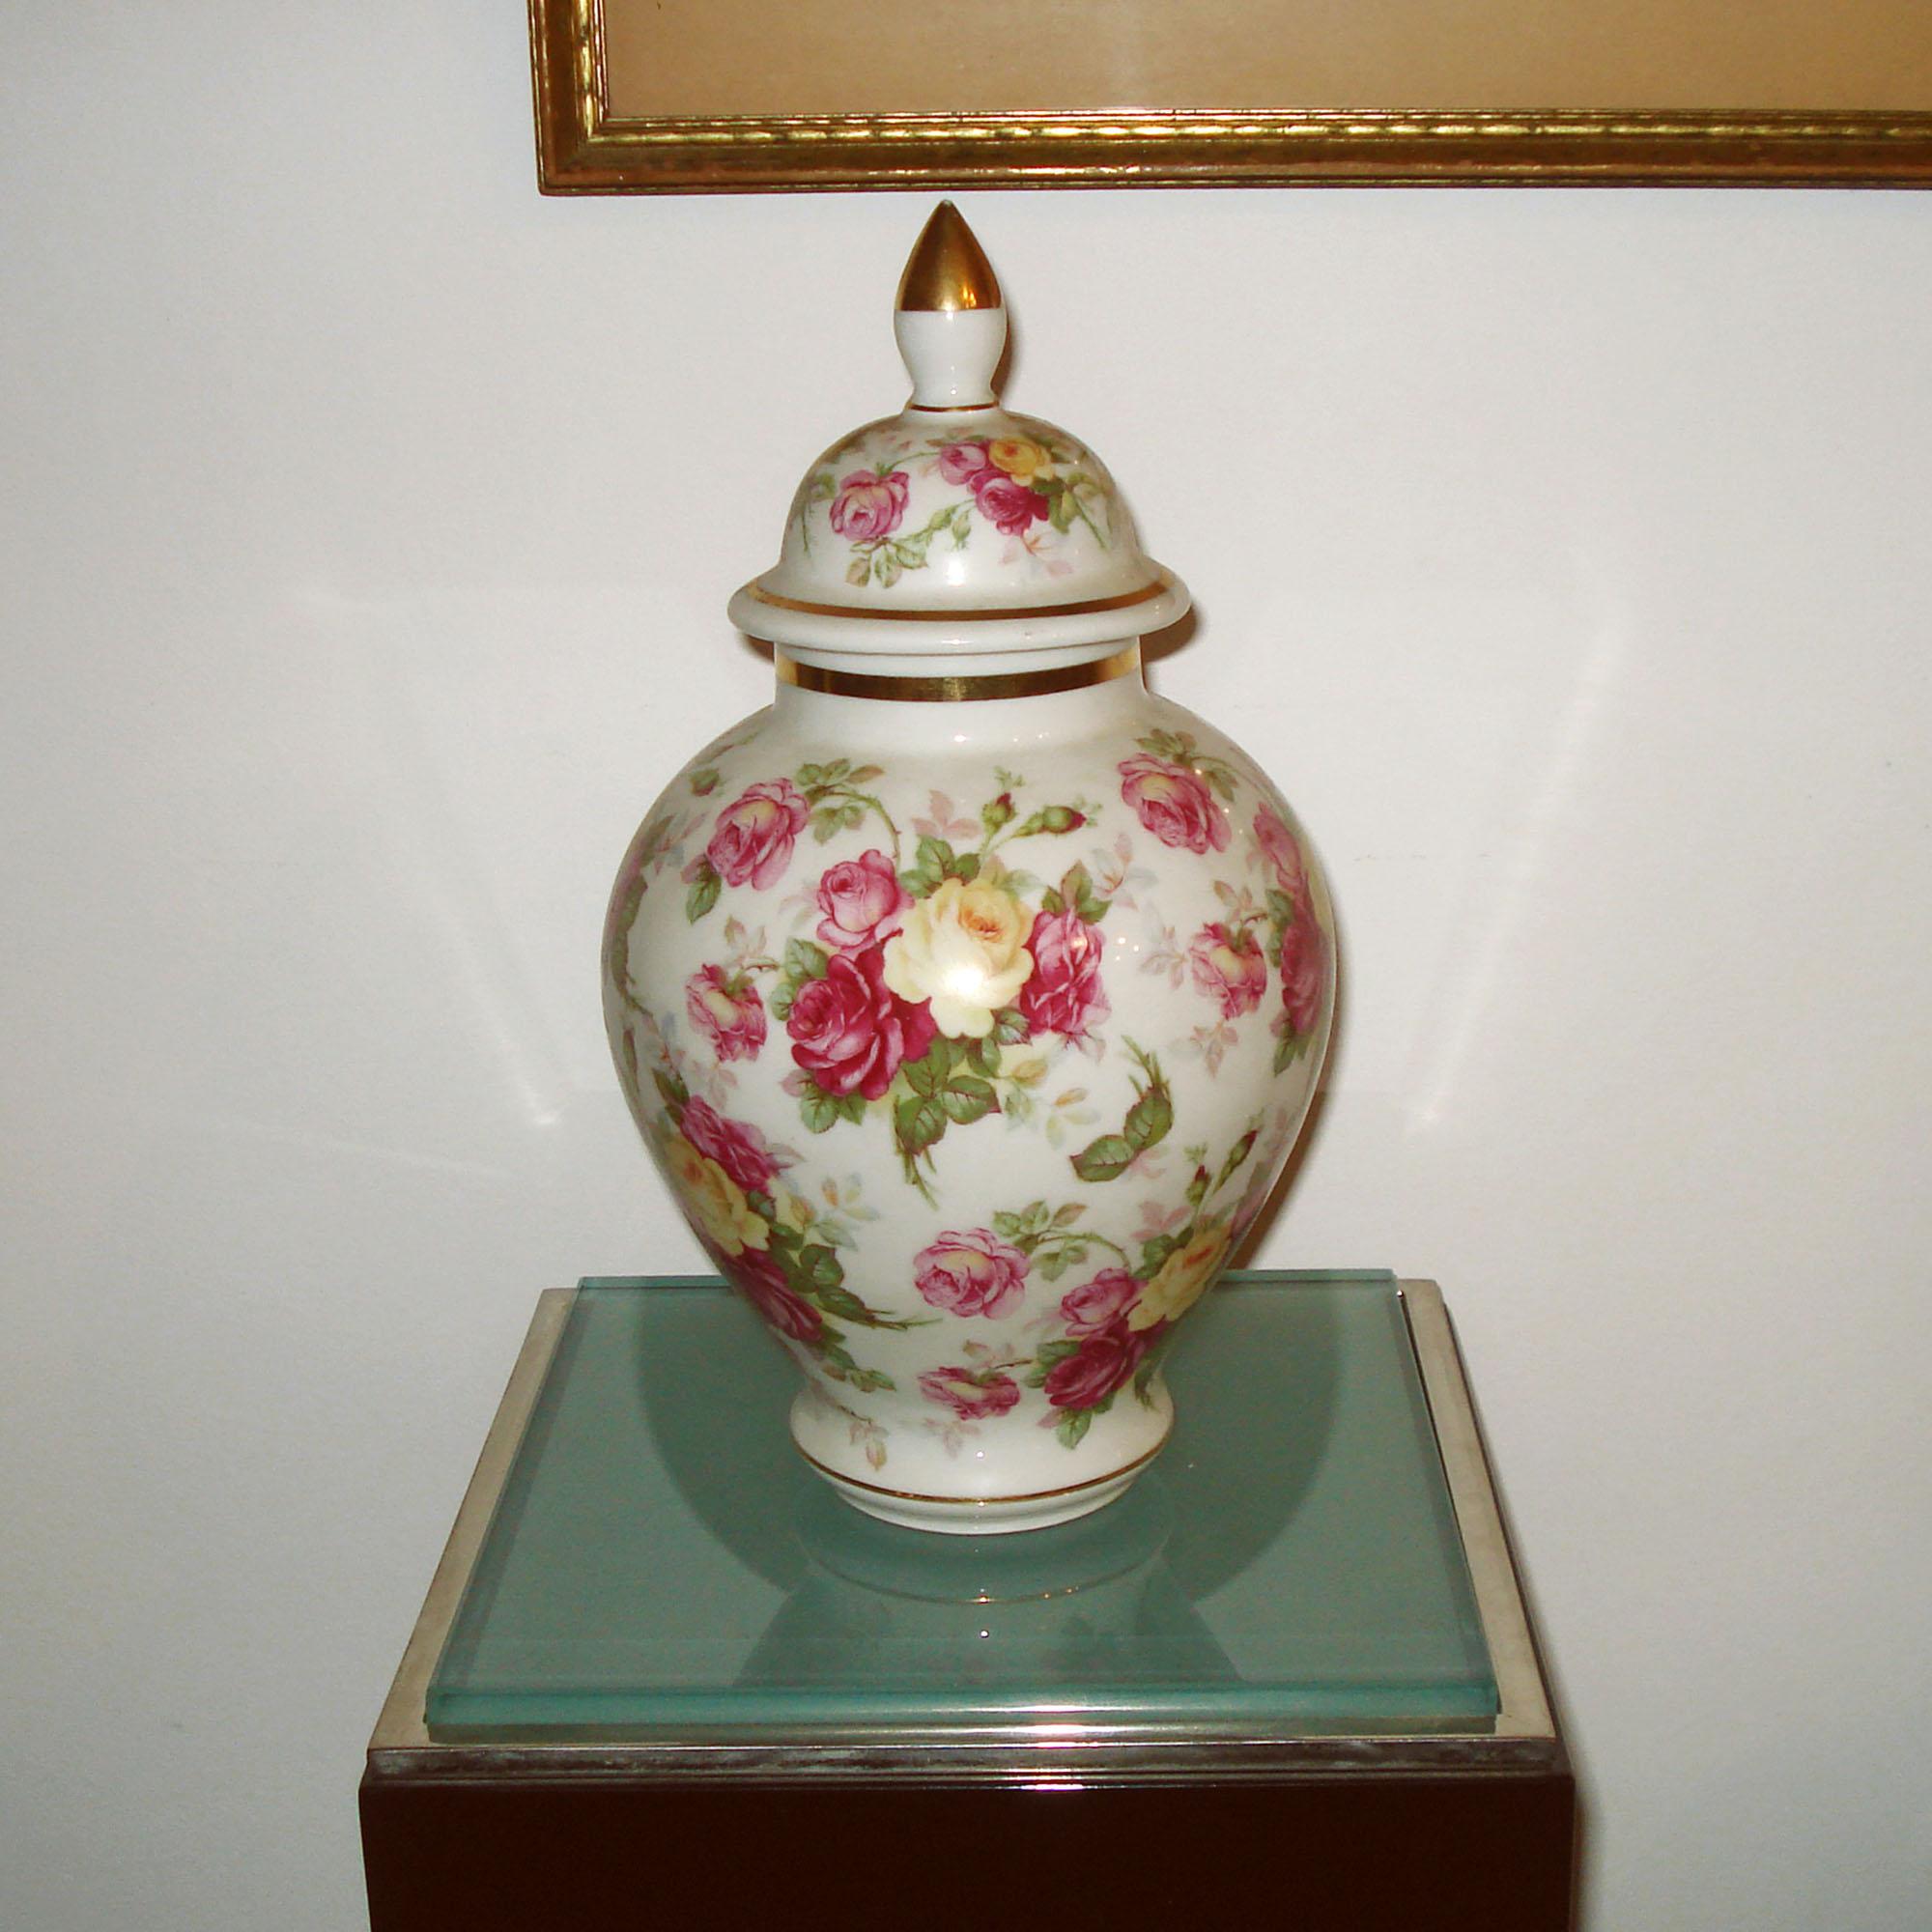 Porcelain urn with lid, hand painted decor of roses, enhanced with 24K gold painted details. Made by Bavaria Schumann, Germany 1940s. Marked on the bottom.
Dimensions:
 Total height, including lid 29 cm (11.5 in), Diameter 16 cm (6.3 in)

